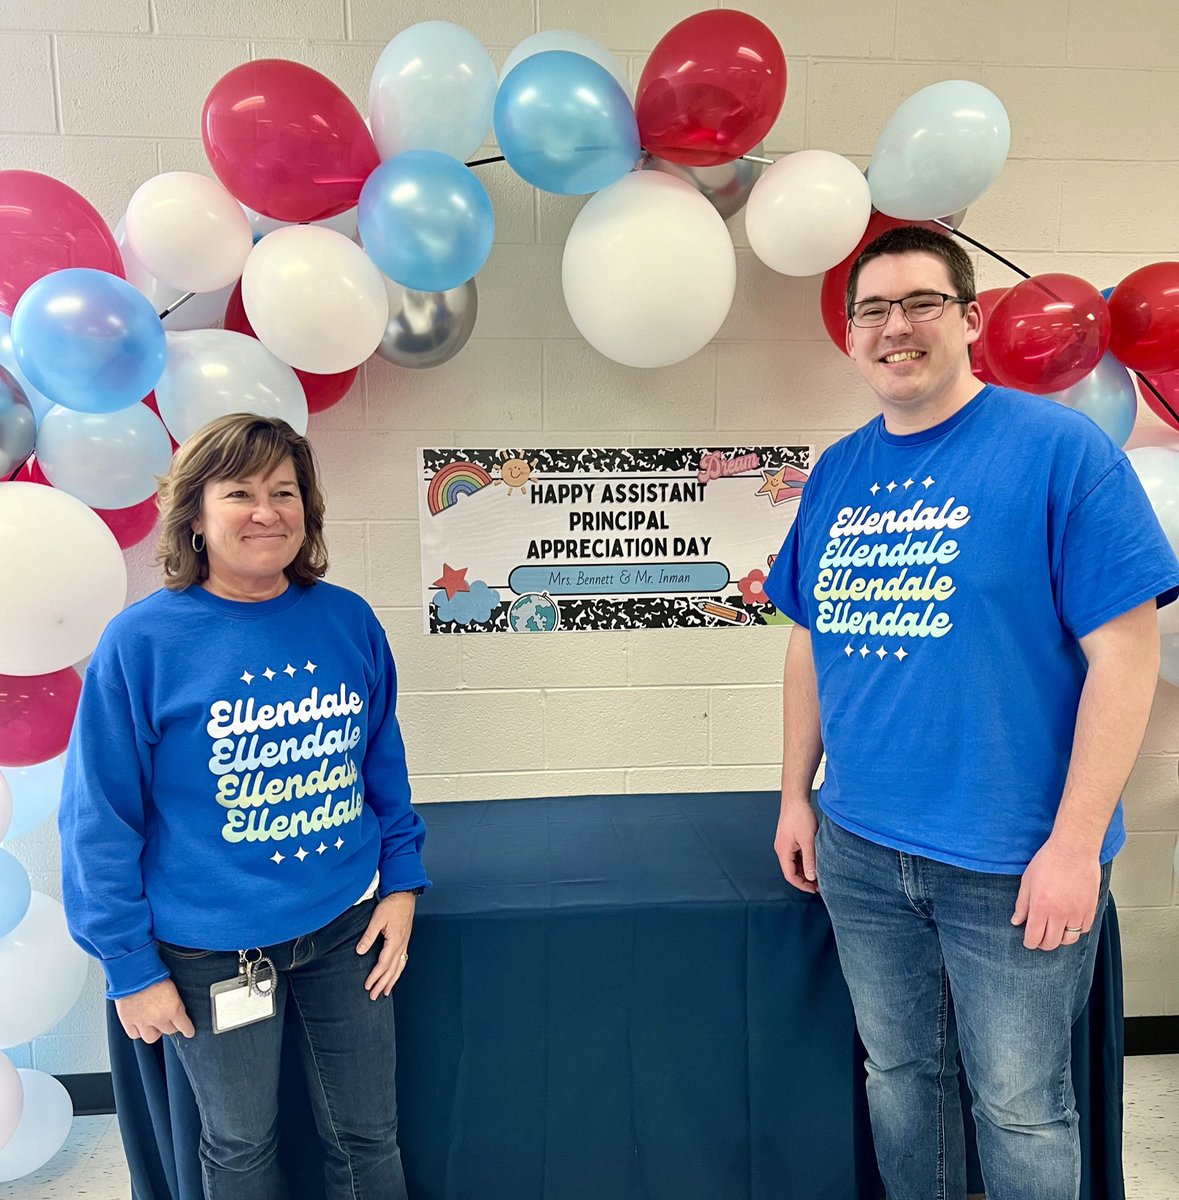 💙💛We love our Assistant Principals here at Ellendale! Happy Assistant Principal Appreciation Day‼️Thank you Mrs. Bennett and Mr. Inman for all that you do!